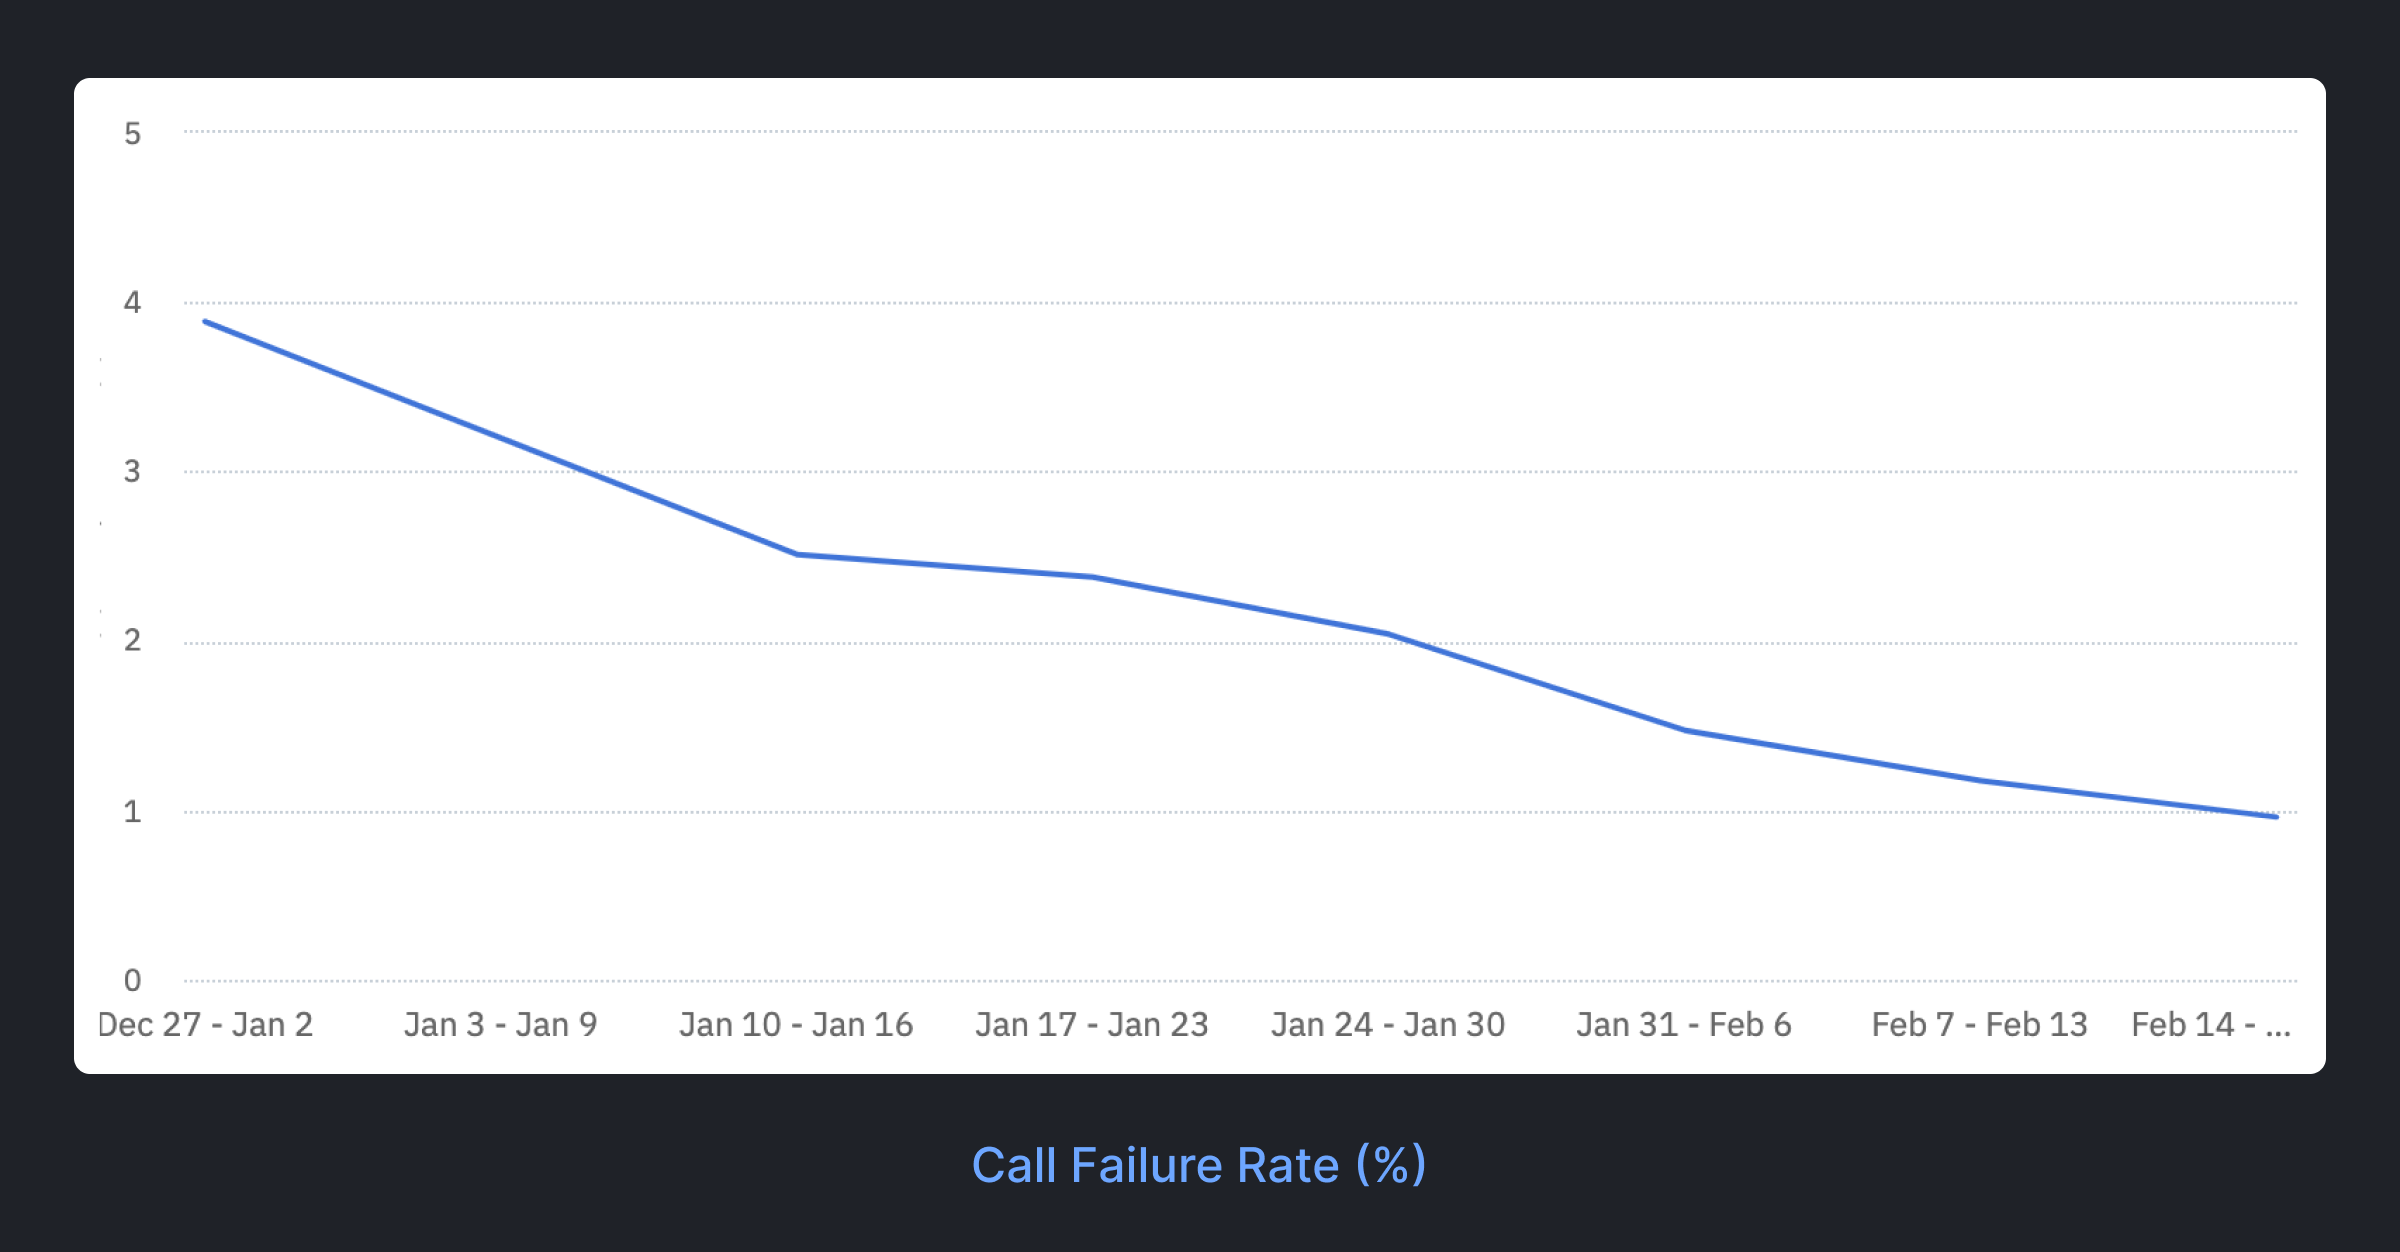 Call Failure Rate (%) on 100ms